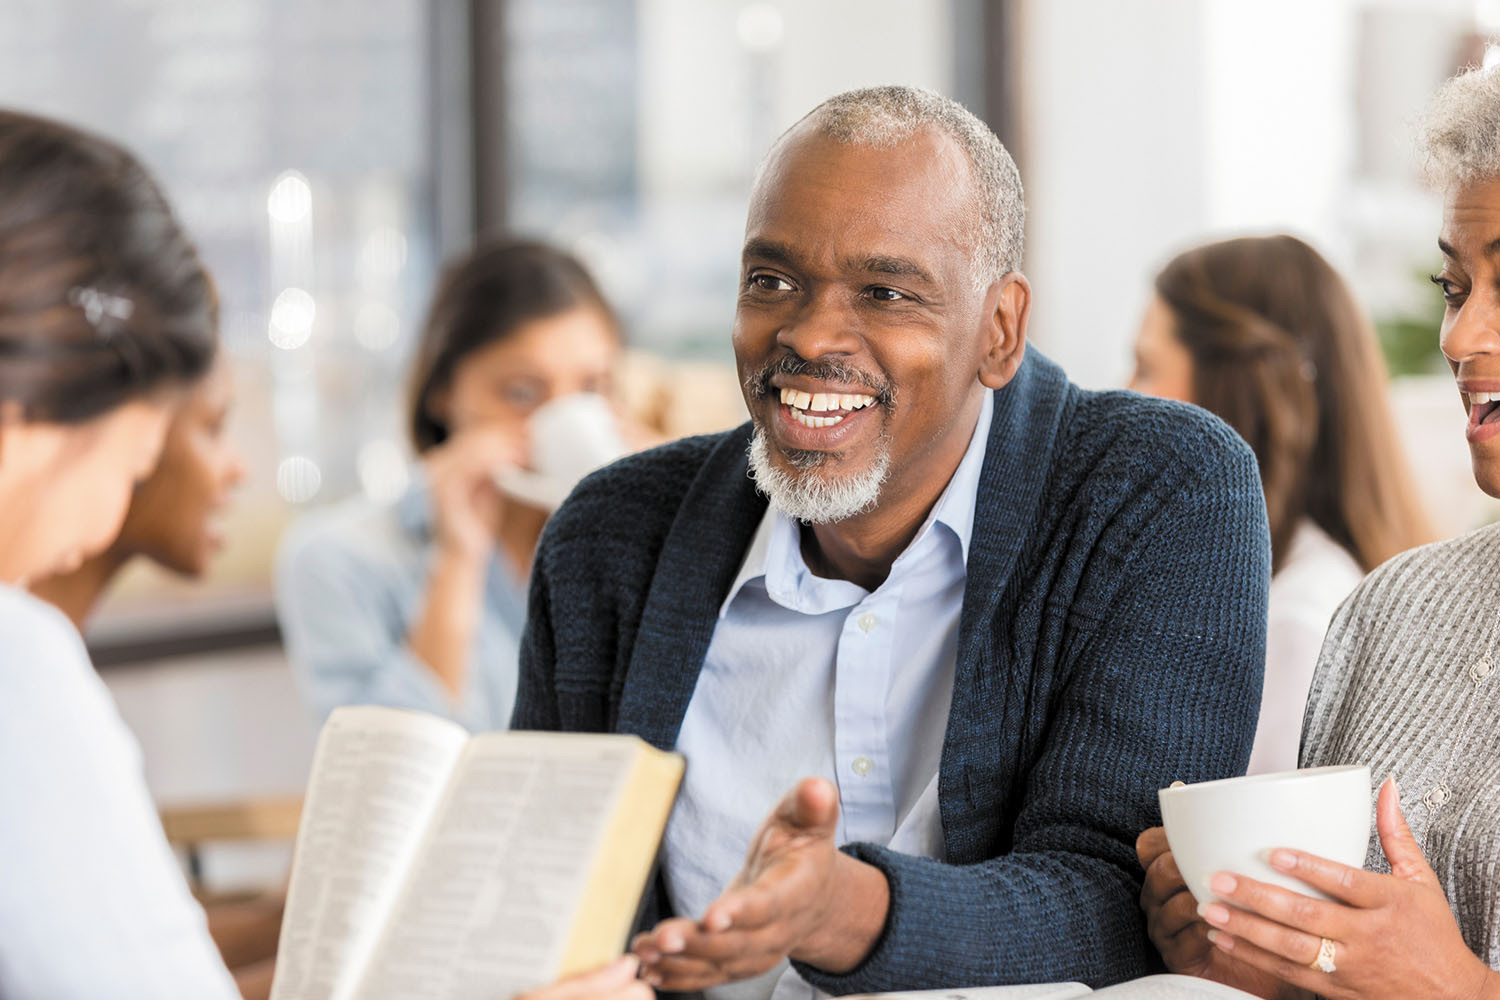 photo of a smiling senior man sitting among a group of people in a bible study class